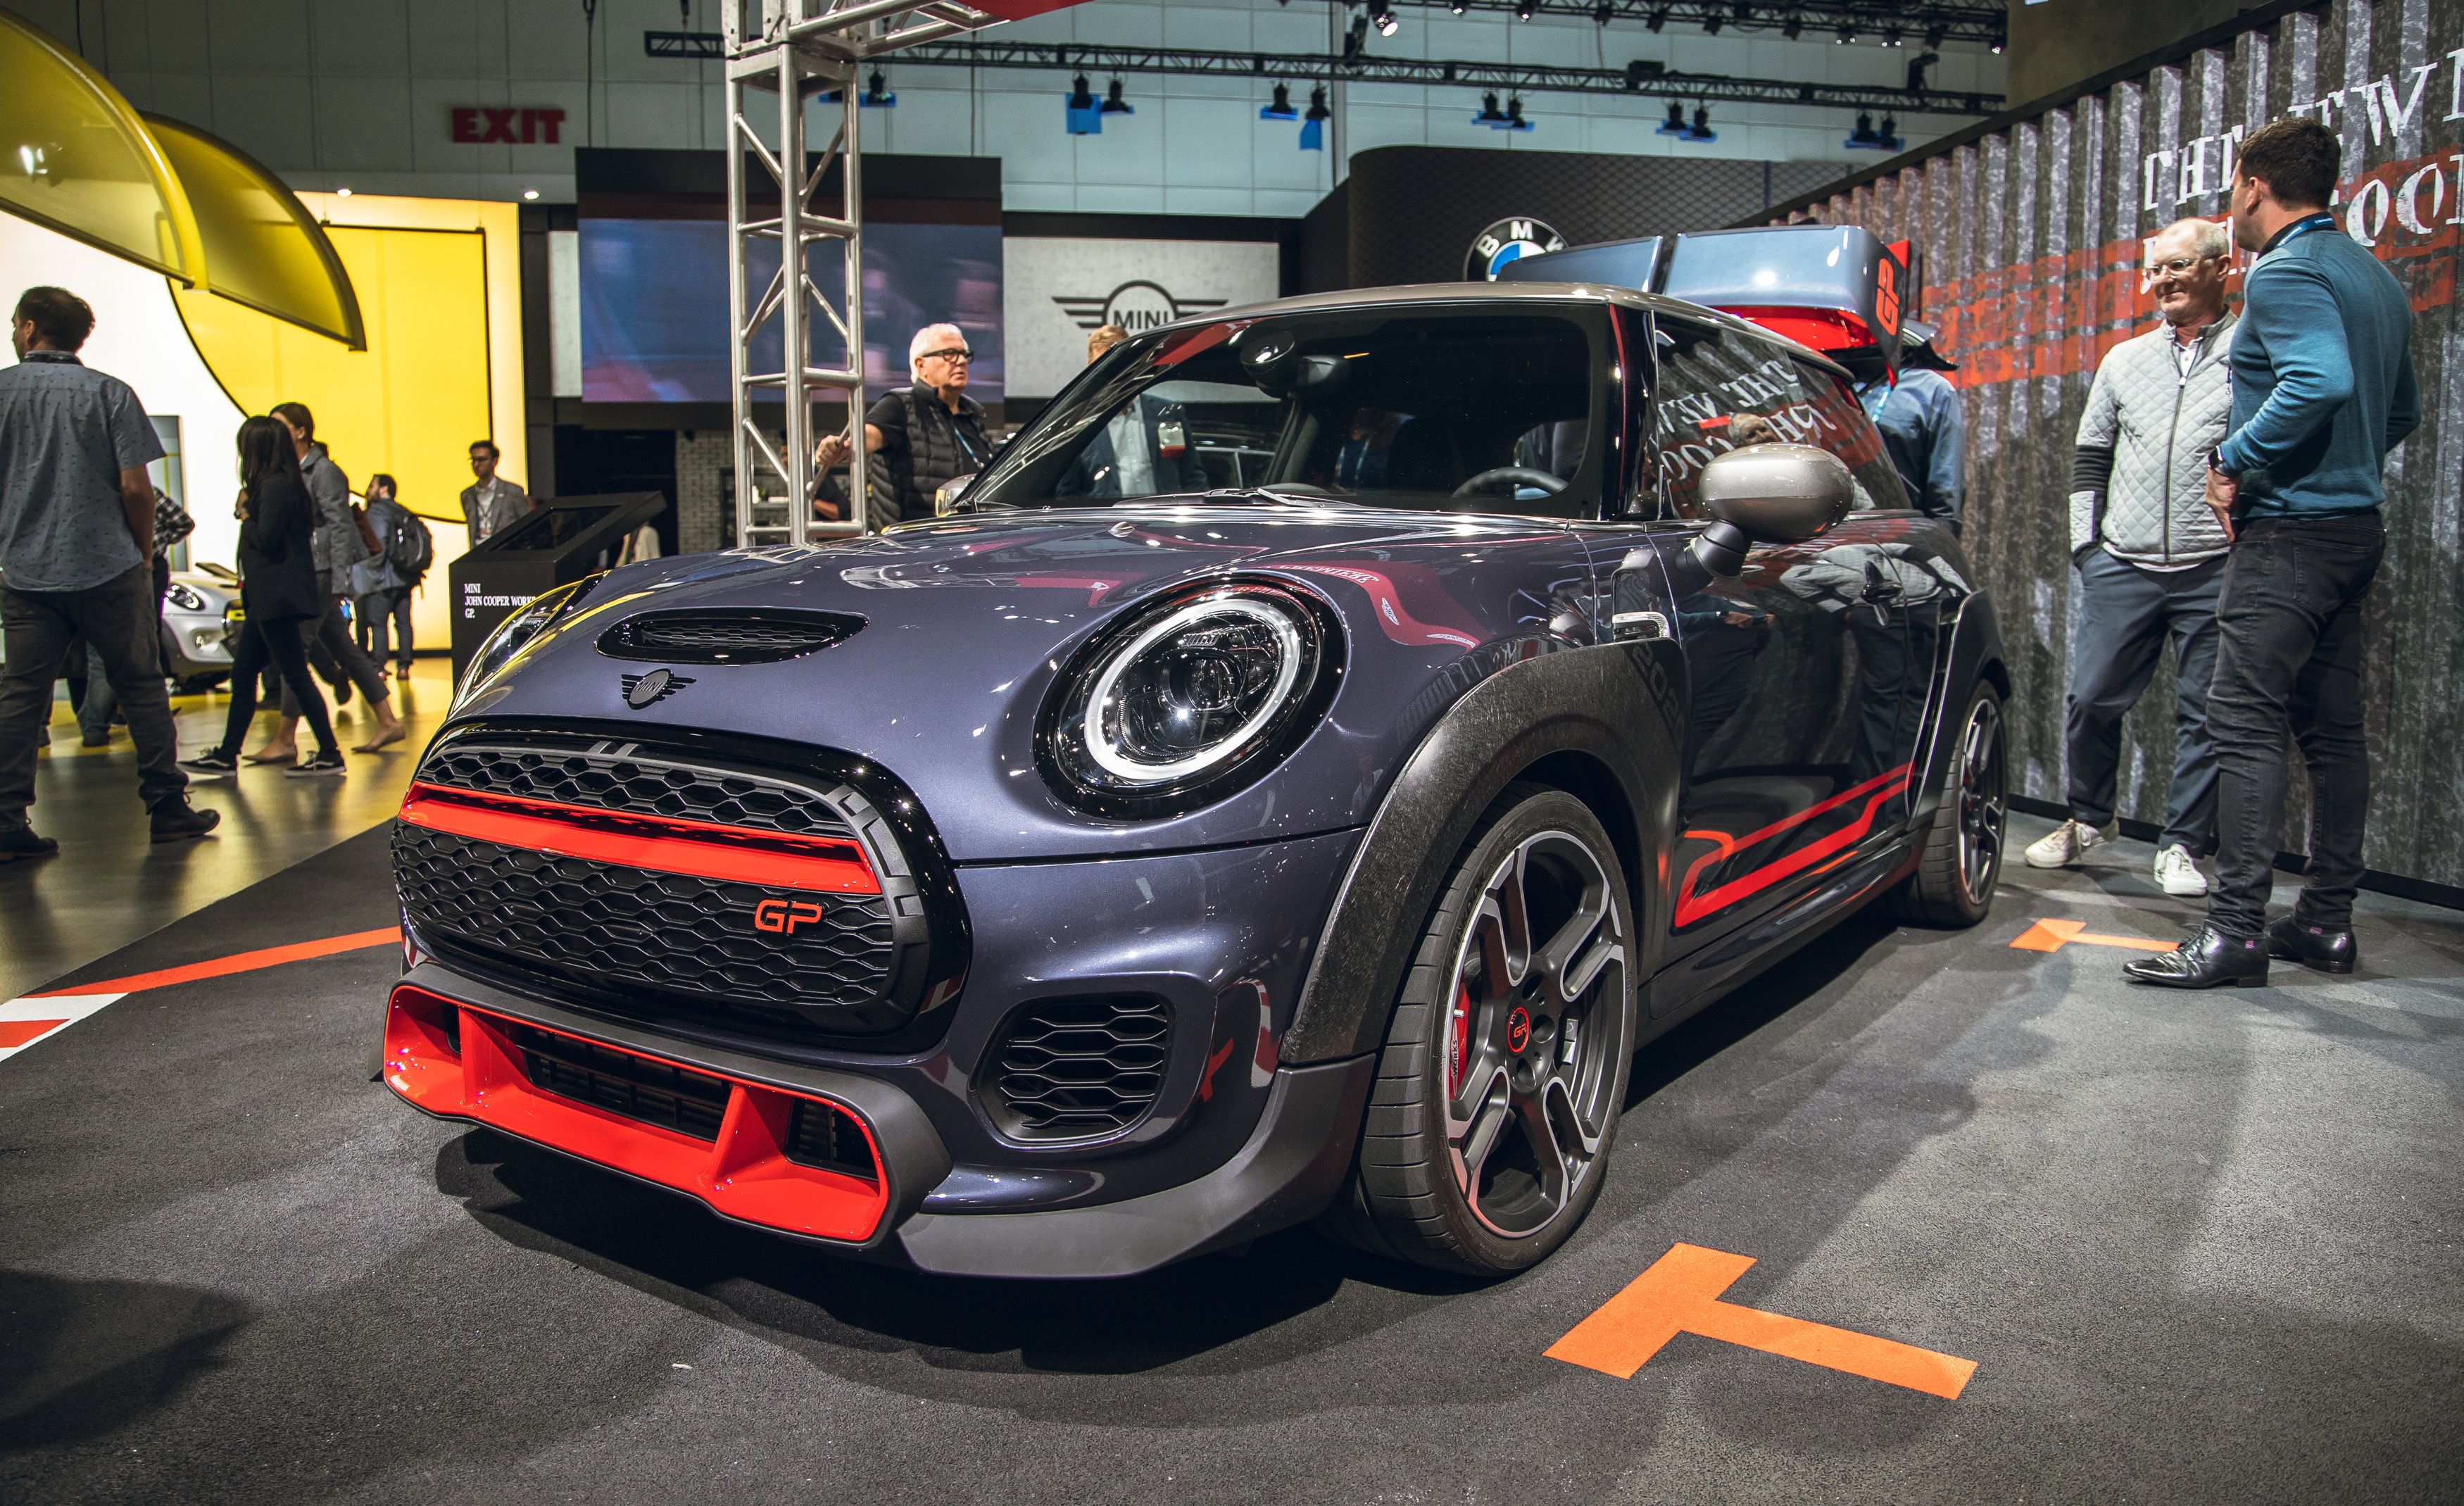 302 Hp Mini John Cooper Works Gp Is Powerful And Production Ready